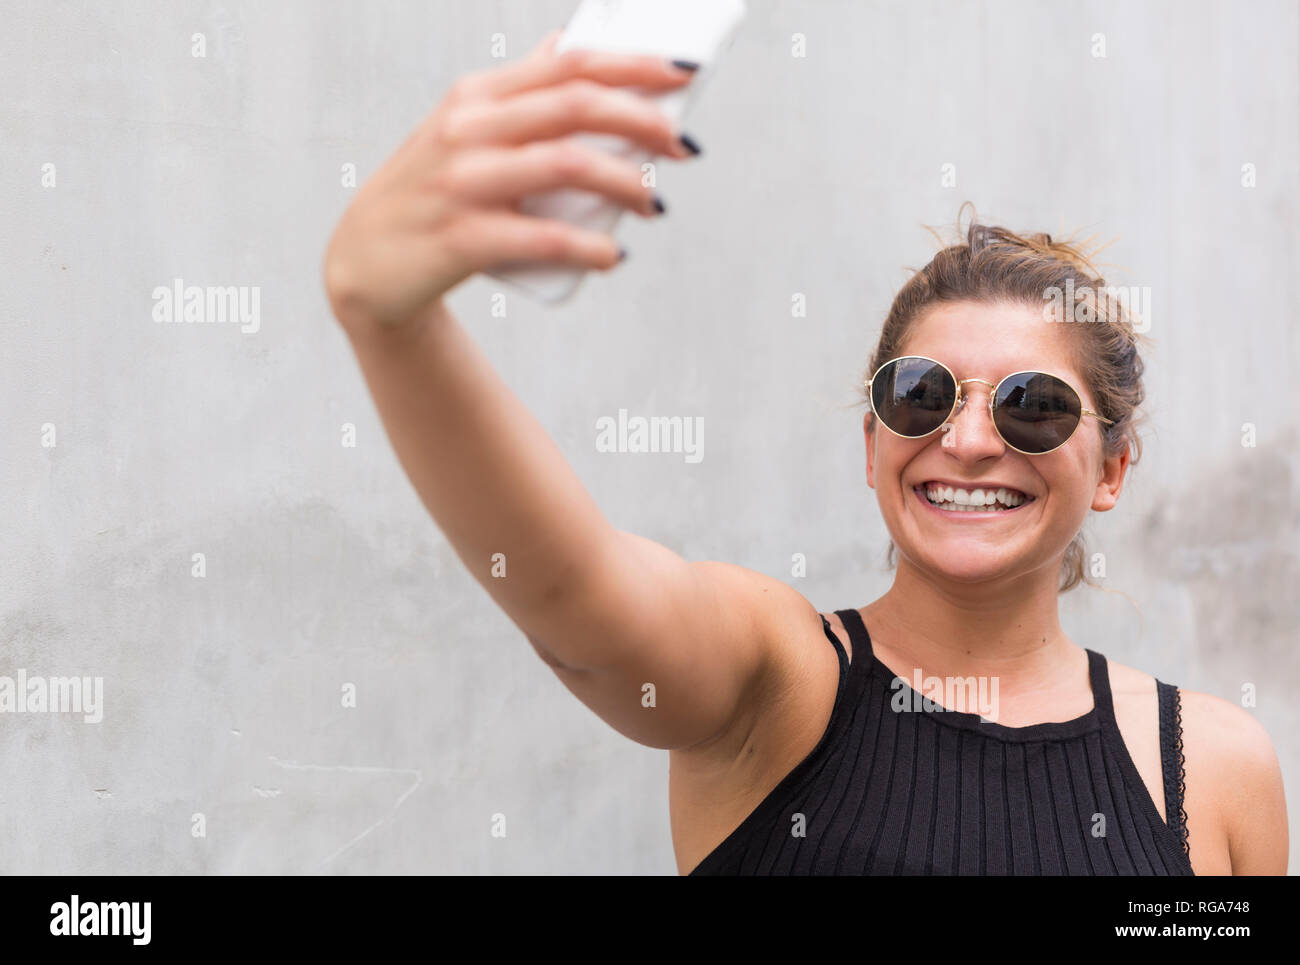 Portrait of laughing young woman wearing sunglasses taking selfie with smartphone Stock Photo